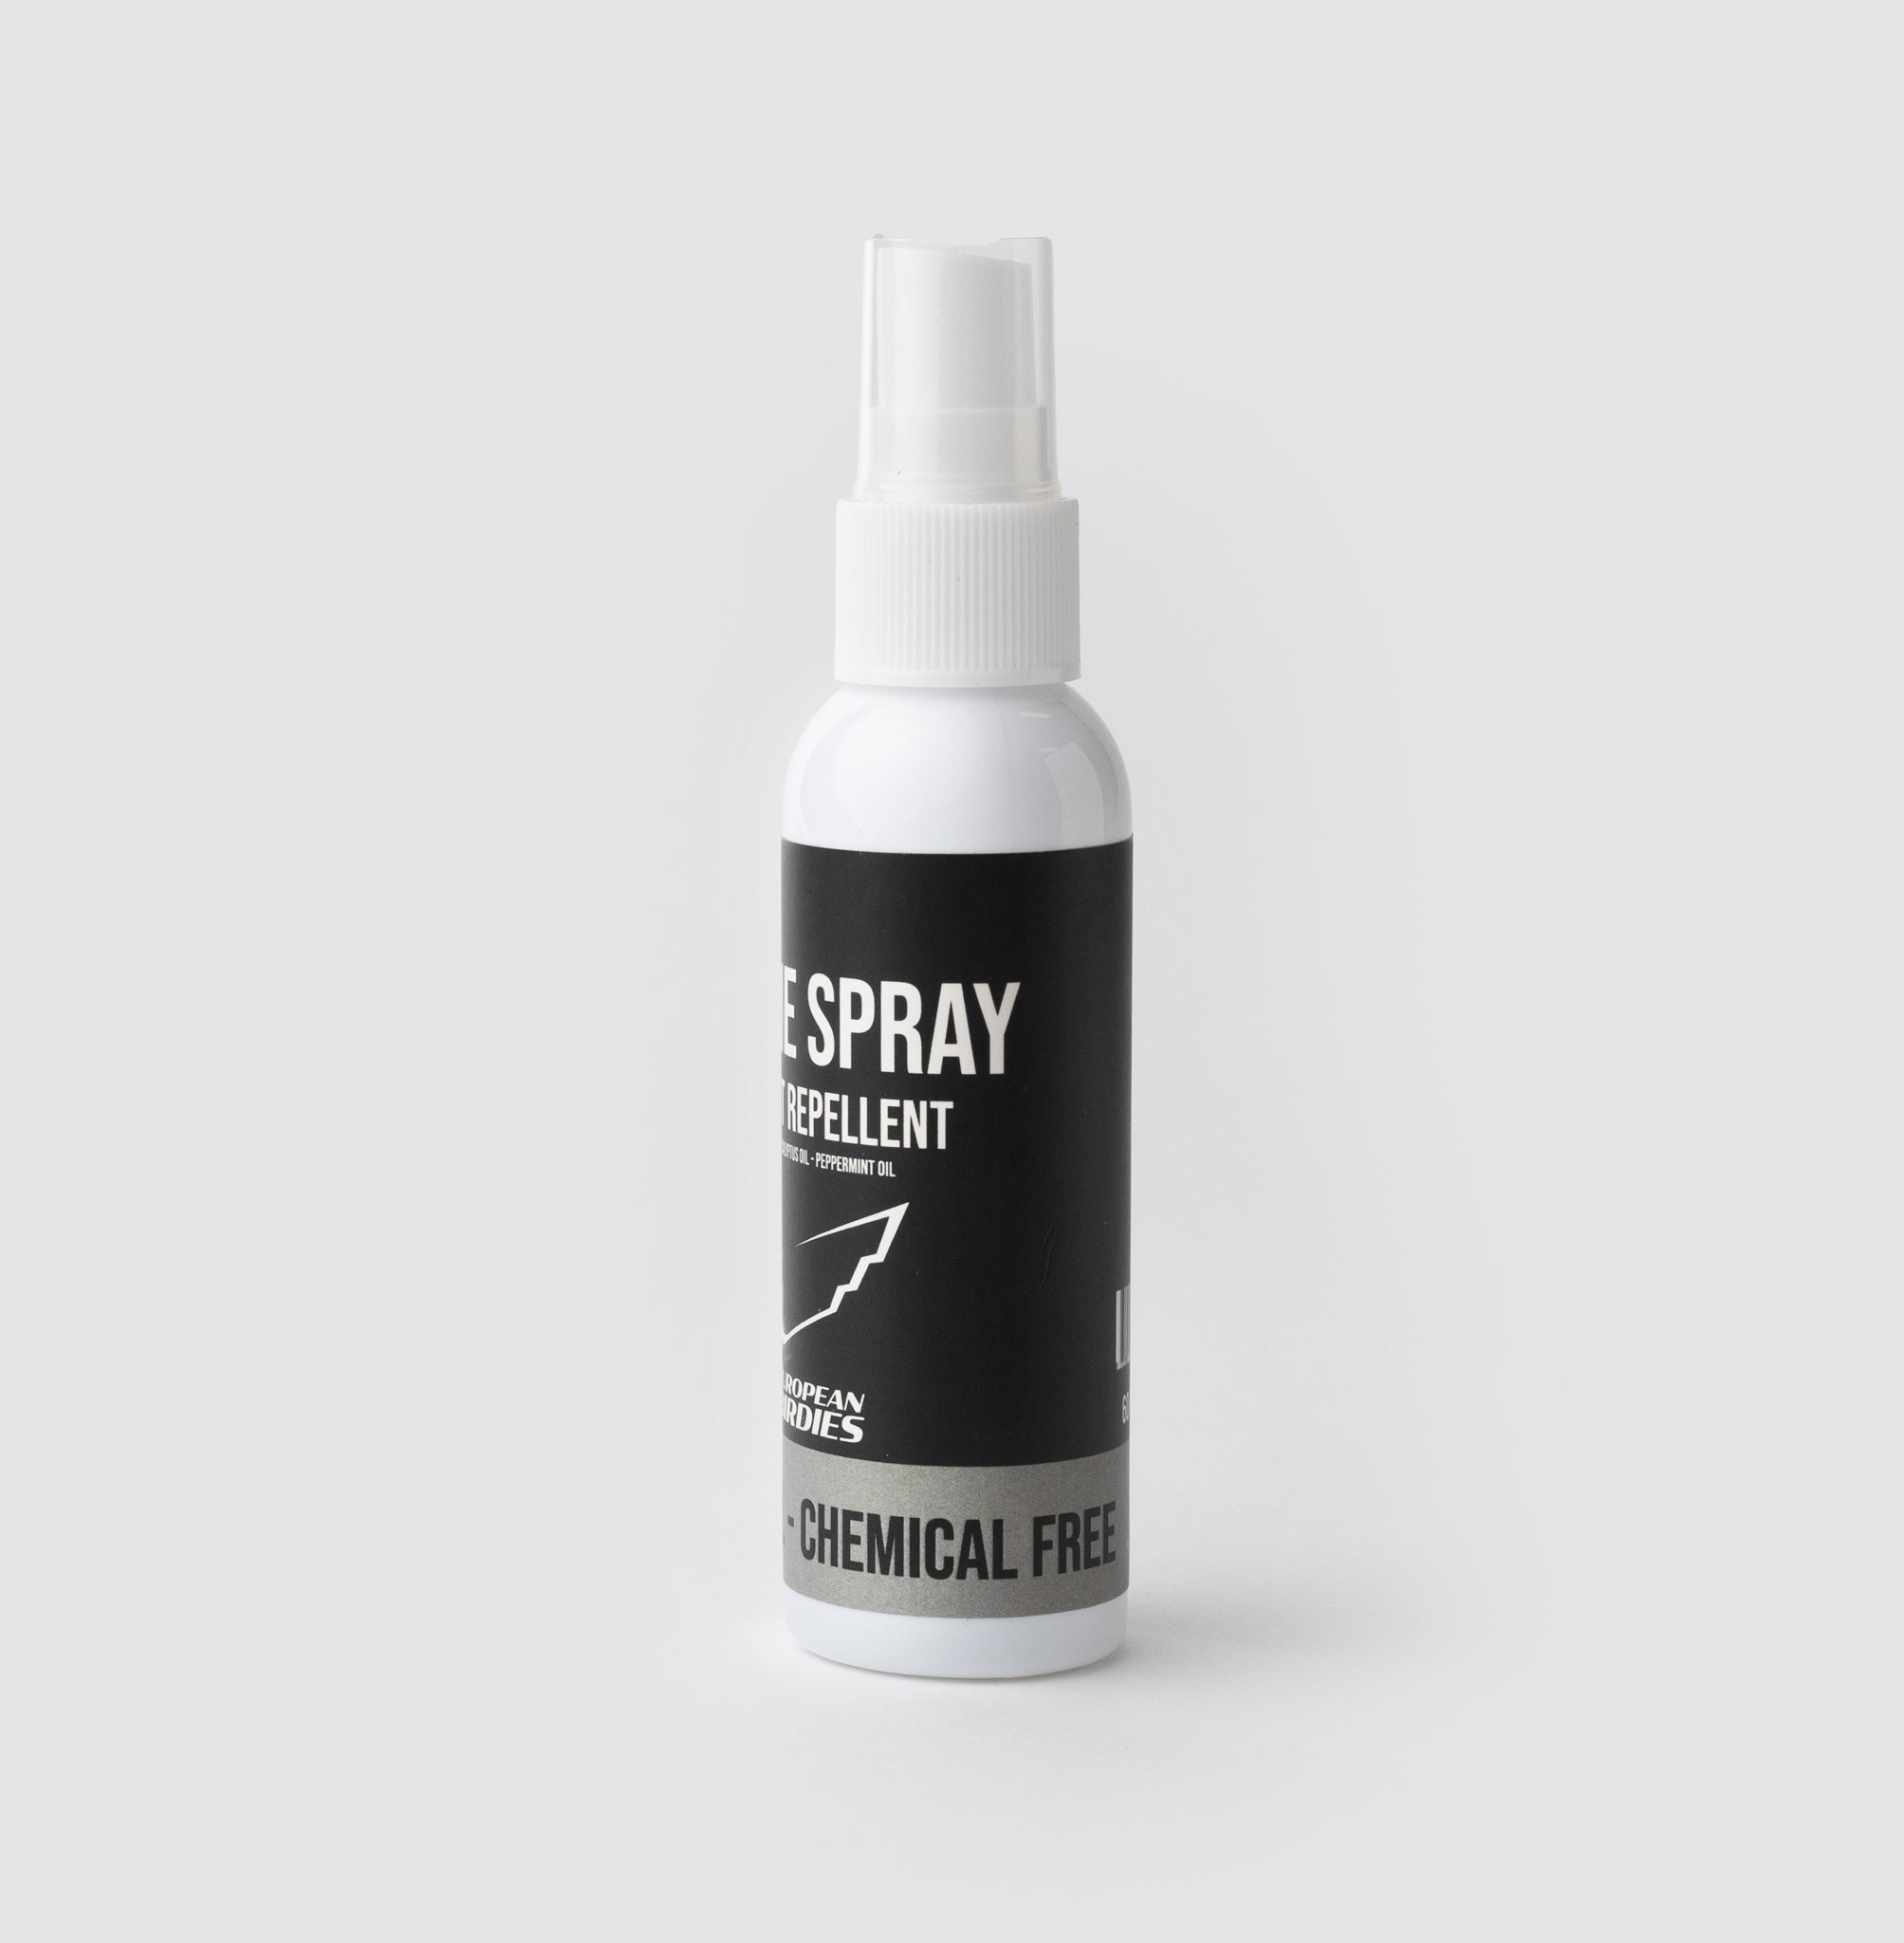 Birdie Spray Natural Insect Repellent